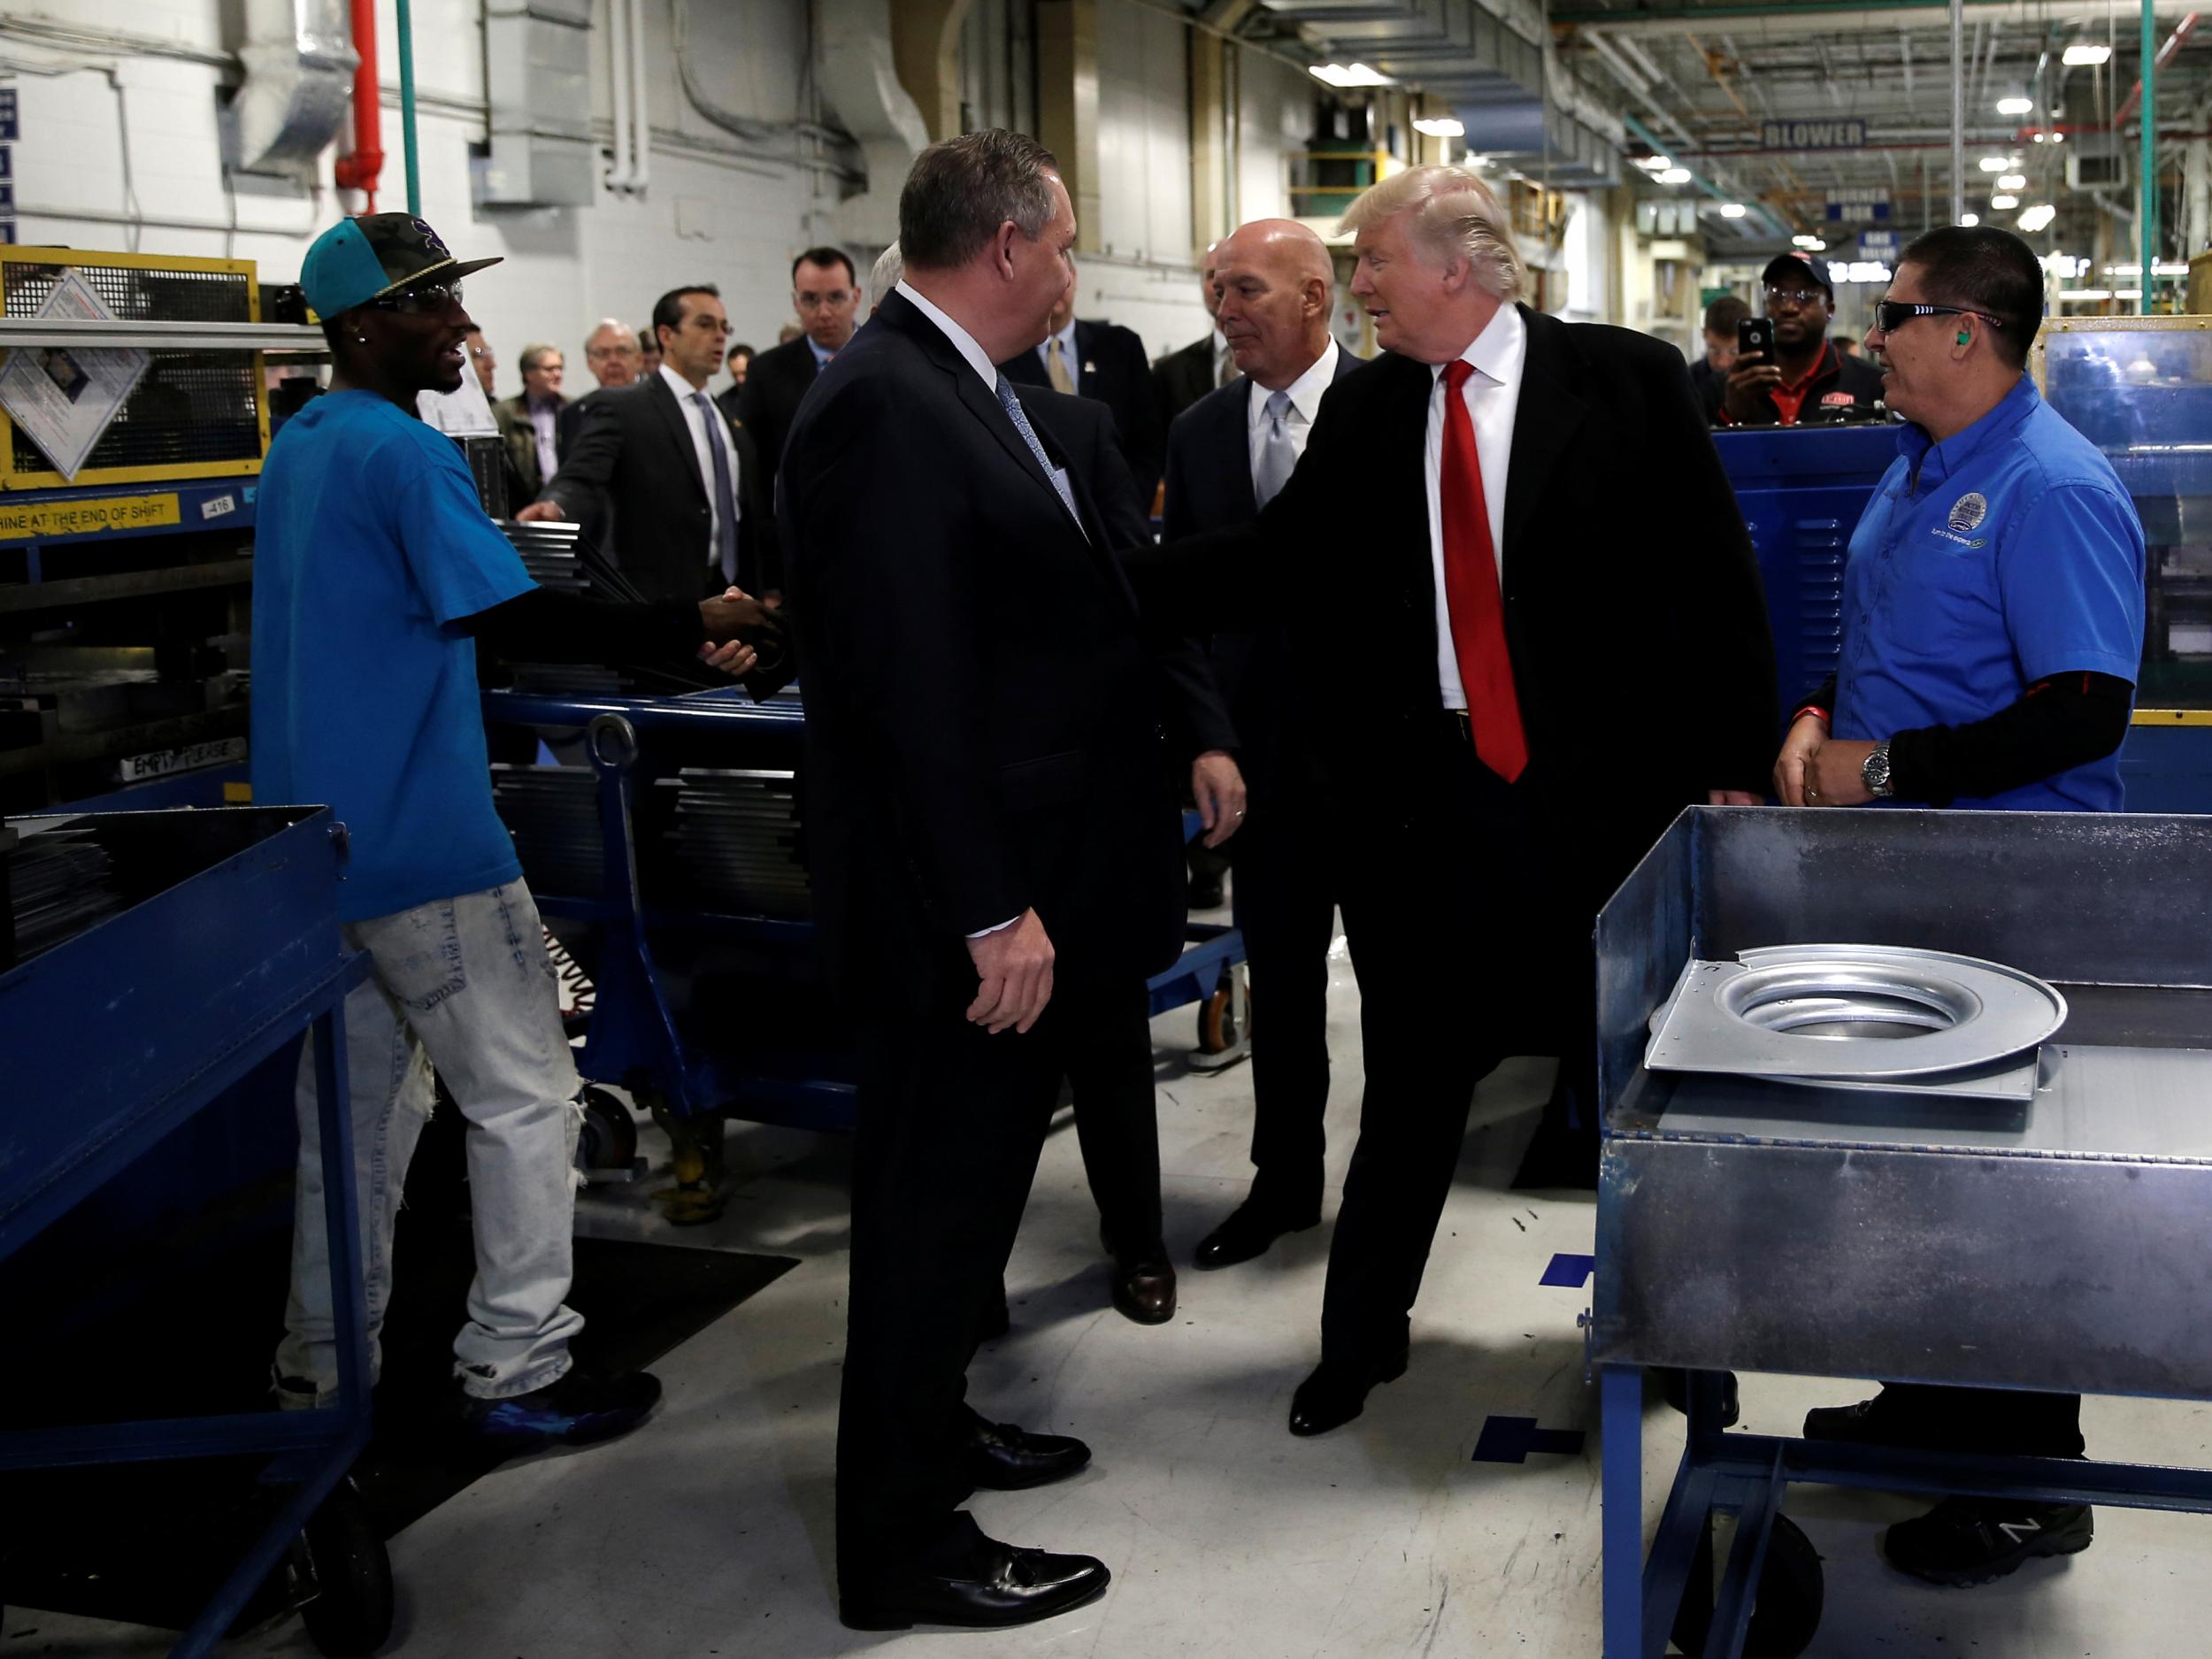 Donald Trump greets workers as he tours a Carrier factory with United Technologies CEO Greg Hayes in Indianapolis, Indiana, on 1 December 2016